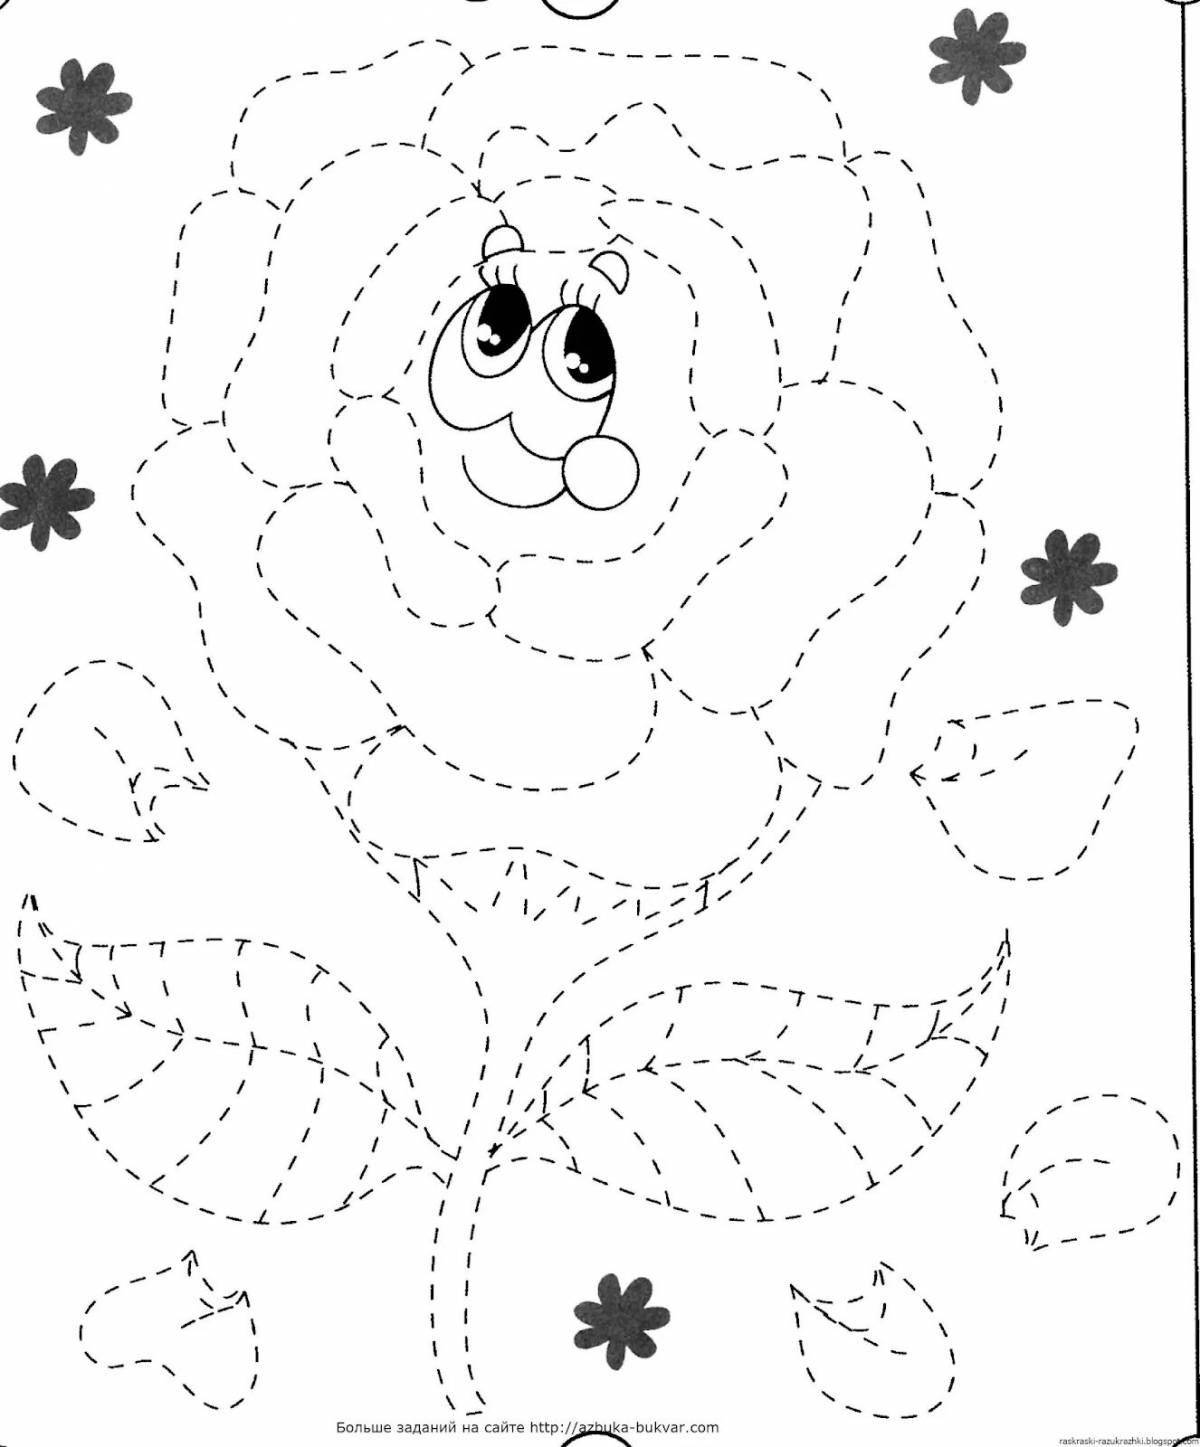 Charming coloring book by glasses 5 years old